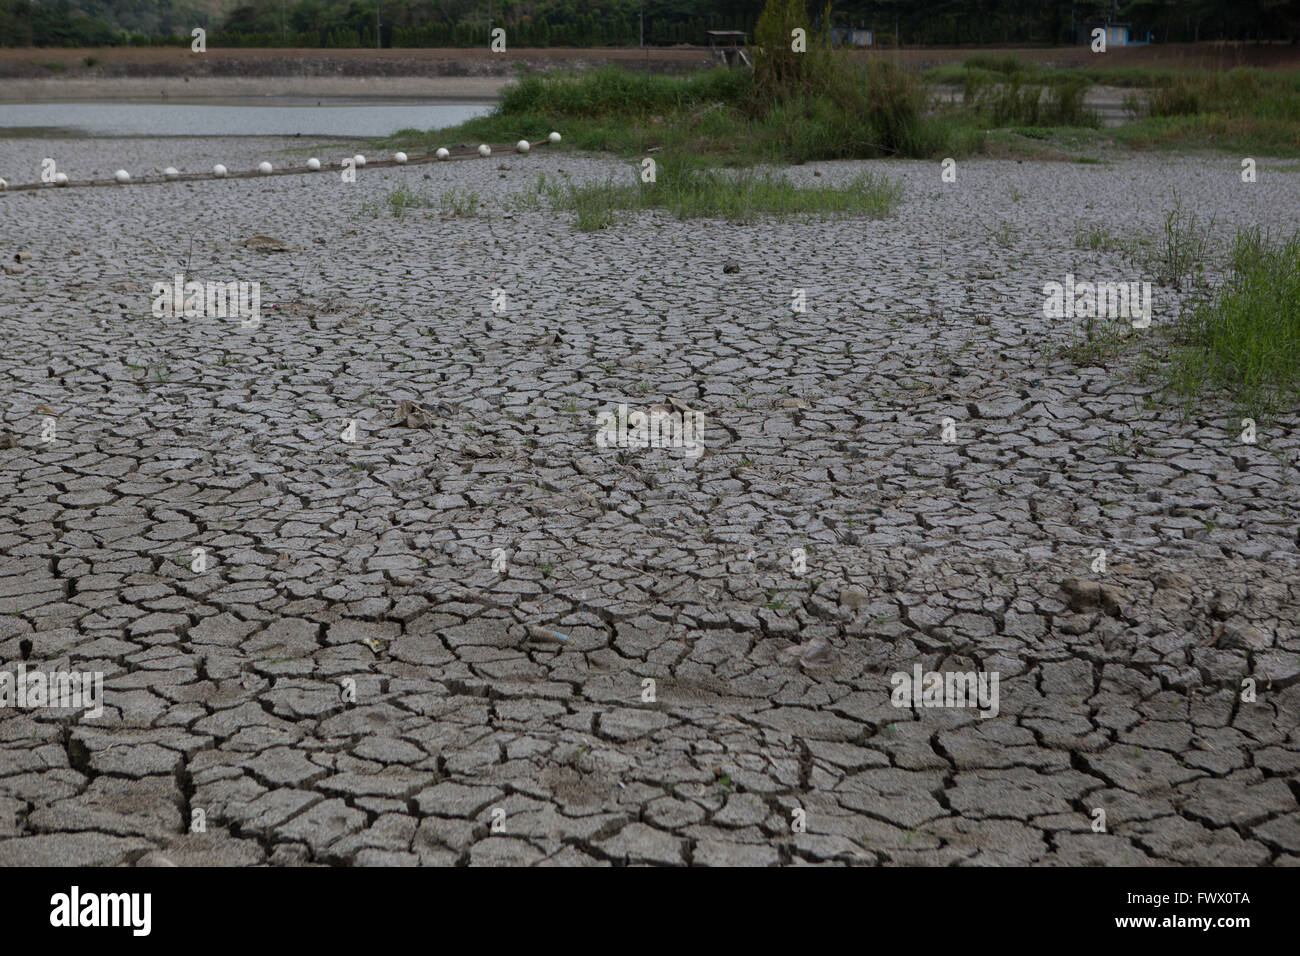 Cebu,Philippines. 8th April, 2016. Extremely dry conditions caused by  El Nino in the Philippines are having a dramatic effect on water supplies.A 'State of Calamity'  was declared on the 8th April 2016 by Cebu City Mayor Michael Rama due to the critically low surface water supplies. © imagegallery2/Alamy Live  News Stock Photo